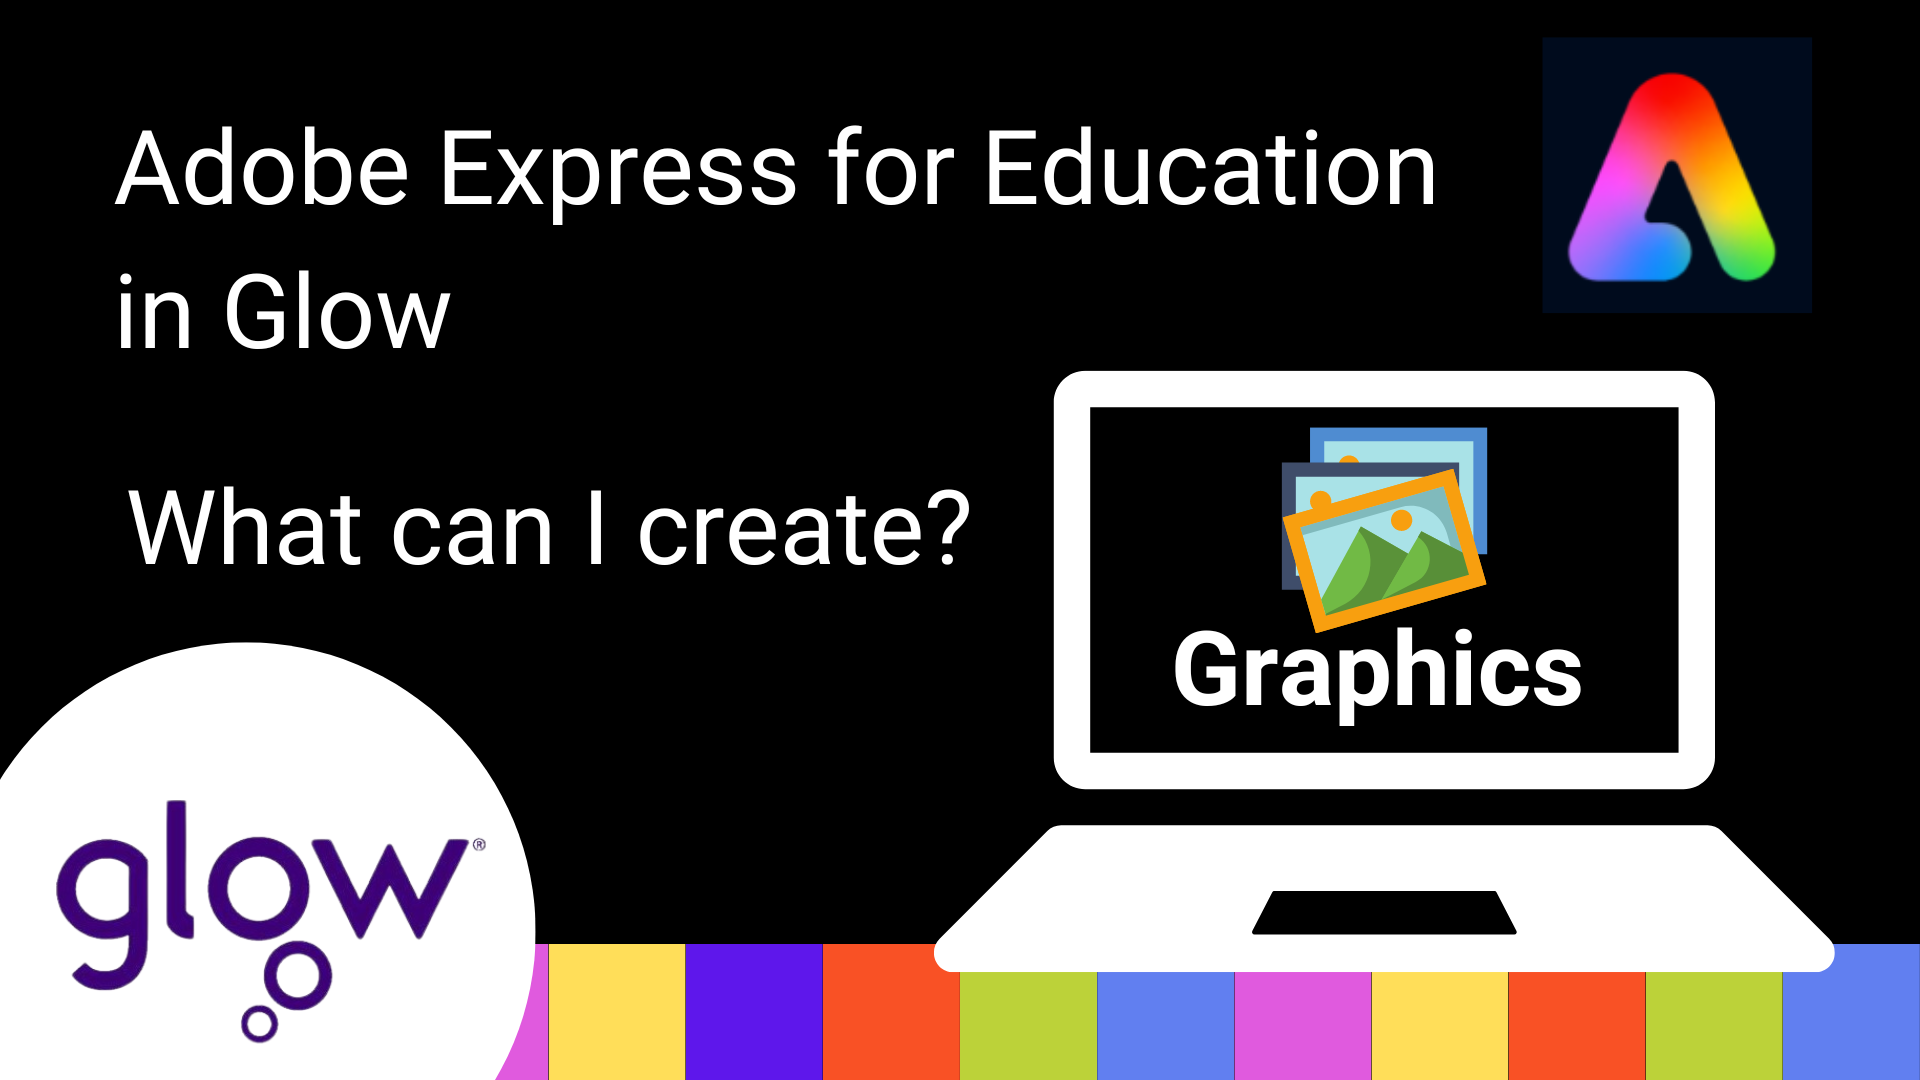 Adobe Express for Education in glow graphic. What can I create? Graphics